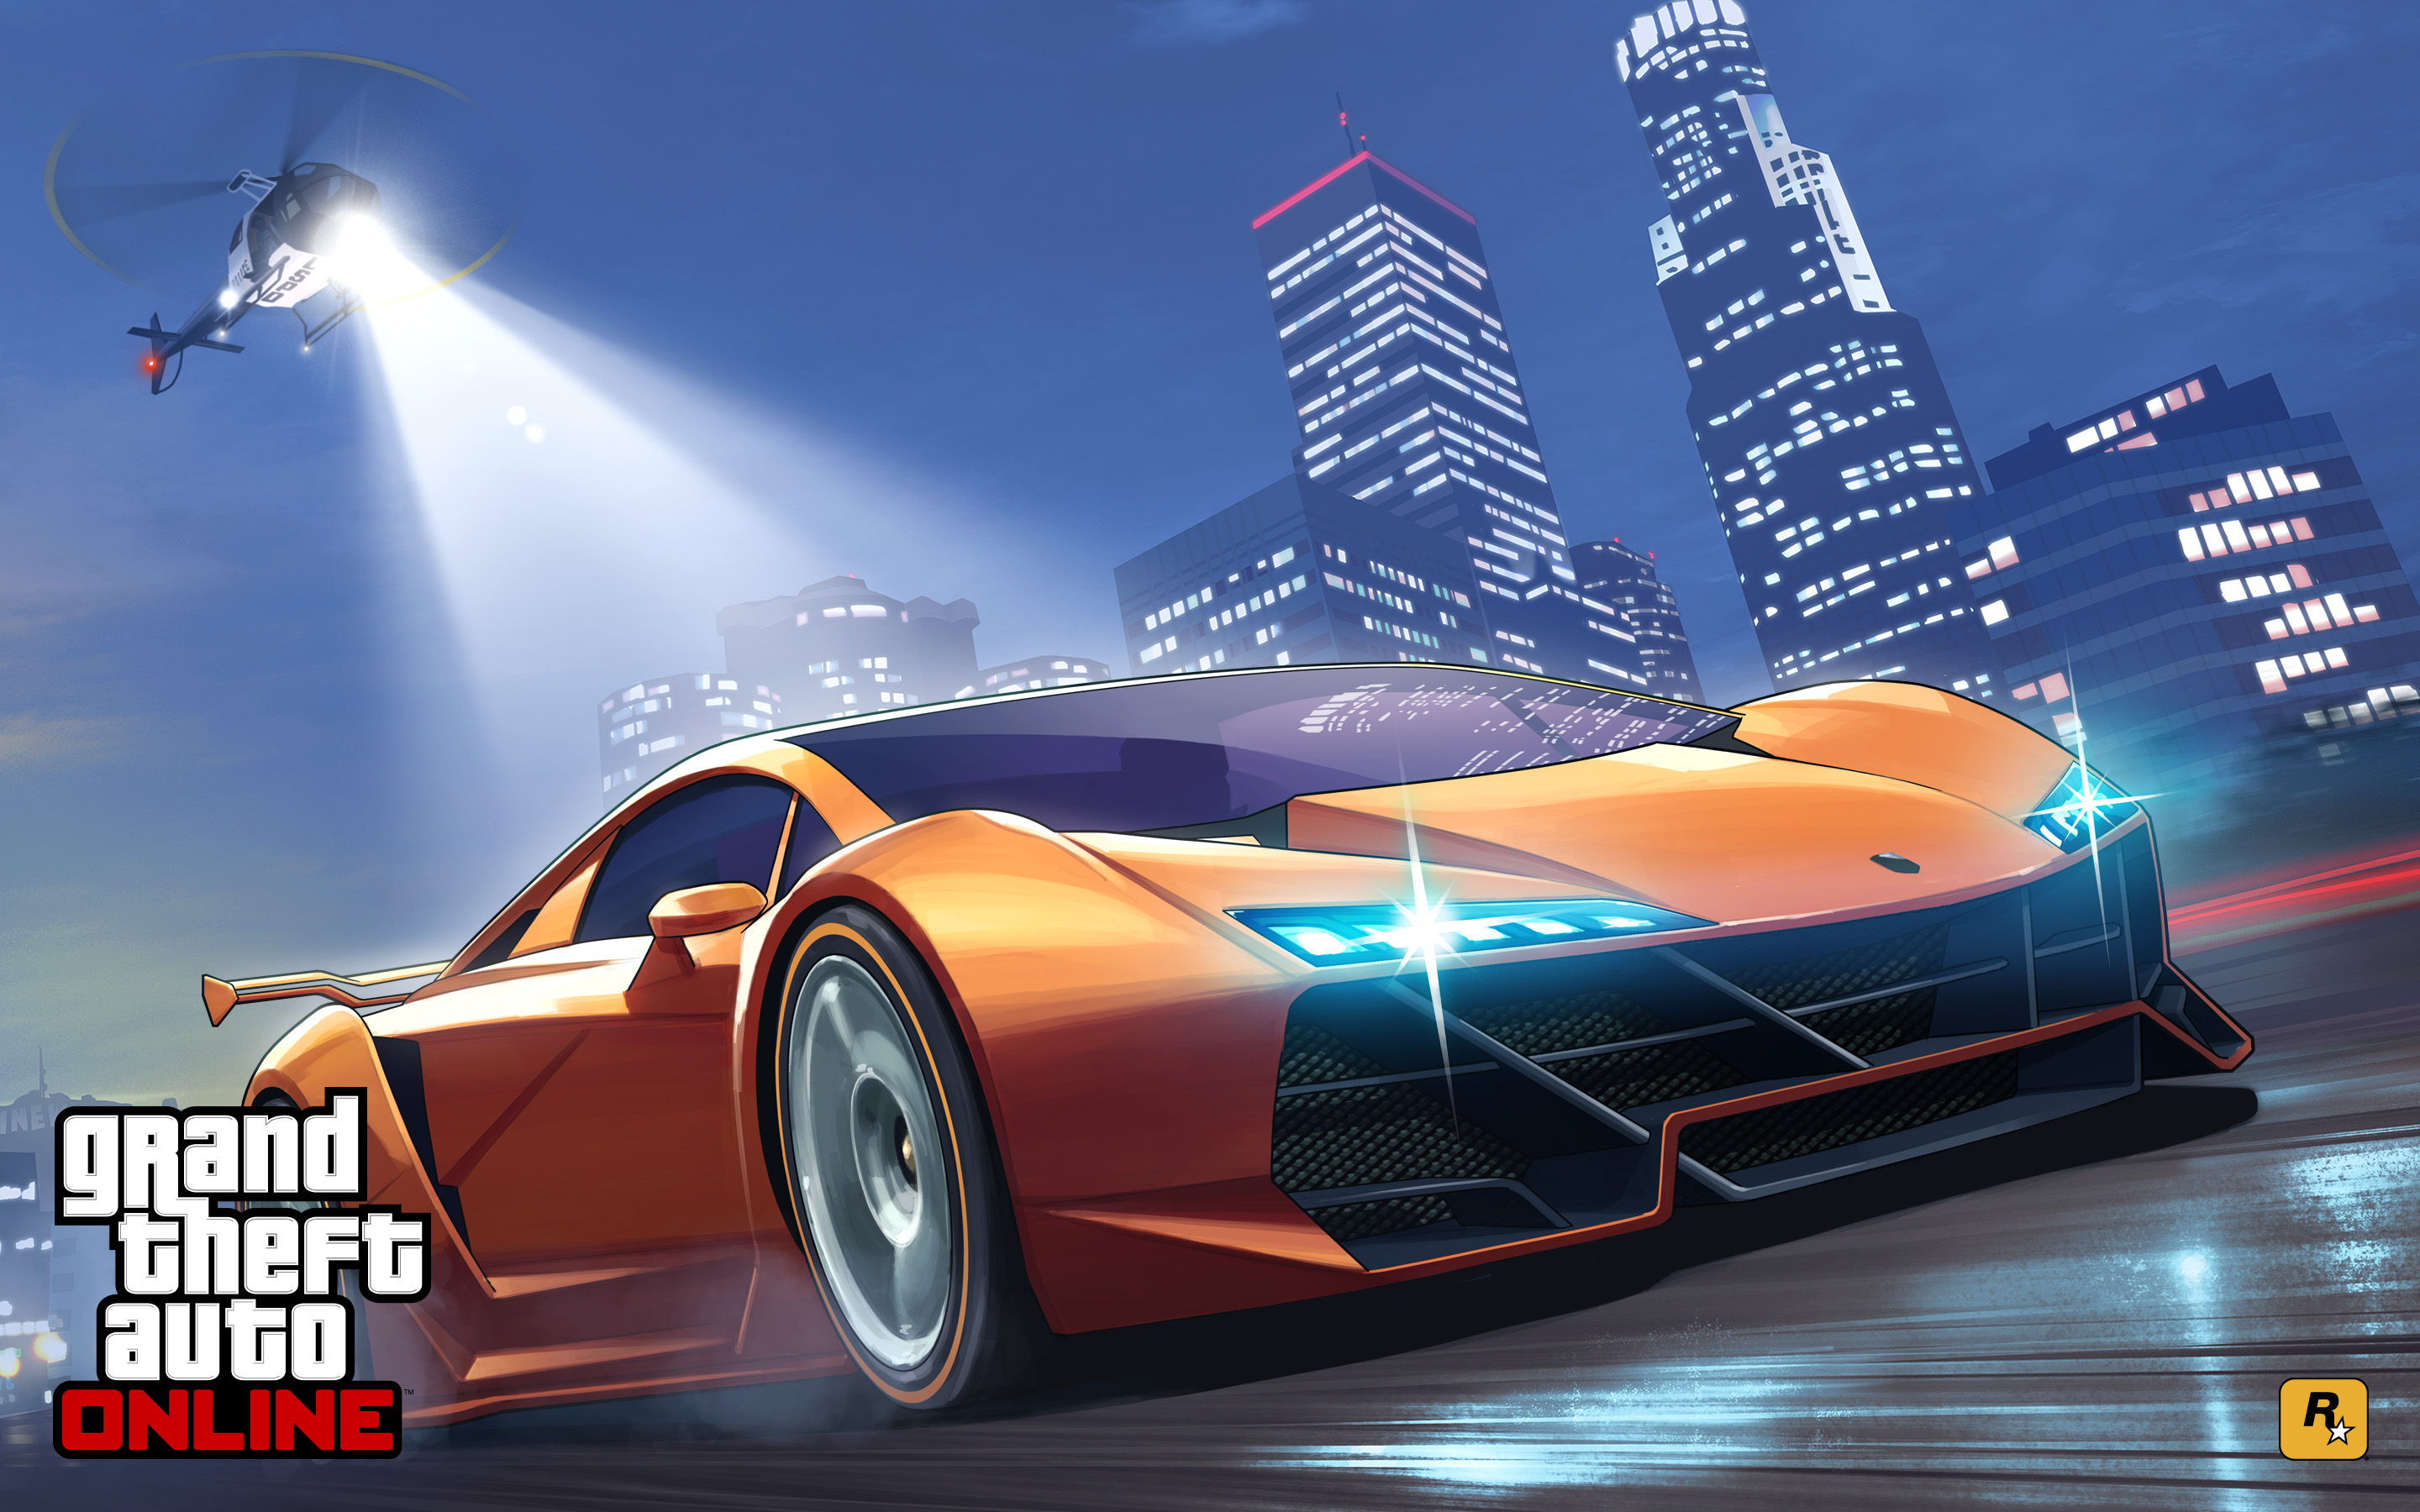 Grand Theft Auto Online 2015 Wallpapers HD Wallpapers 2880x1800